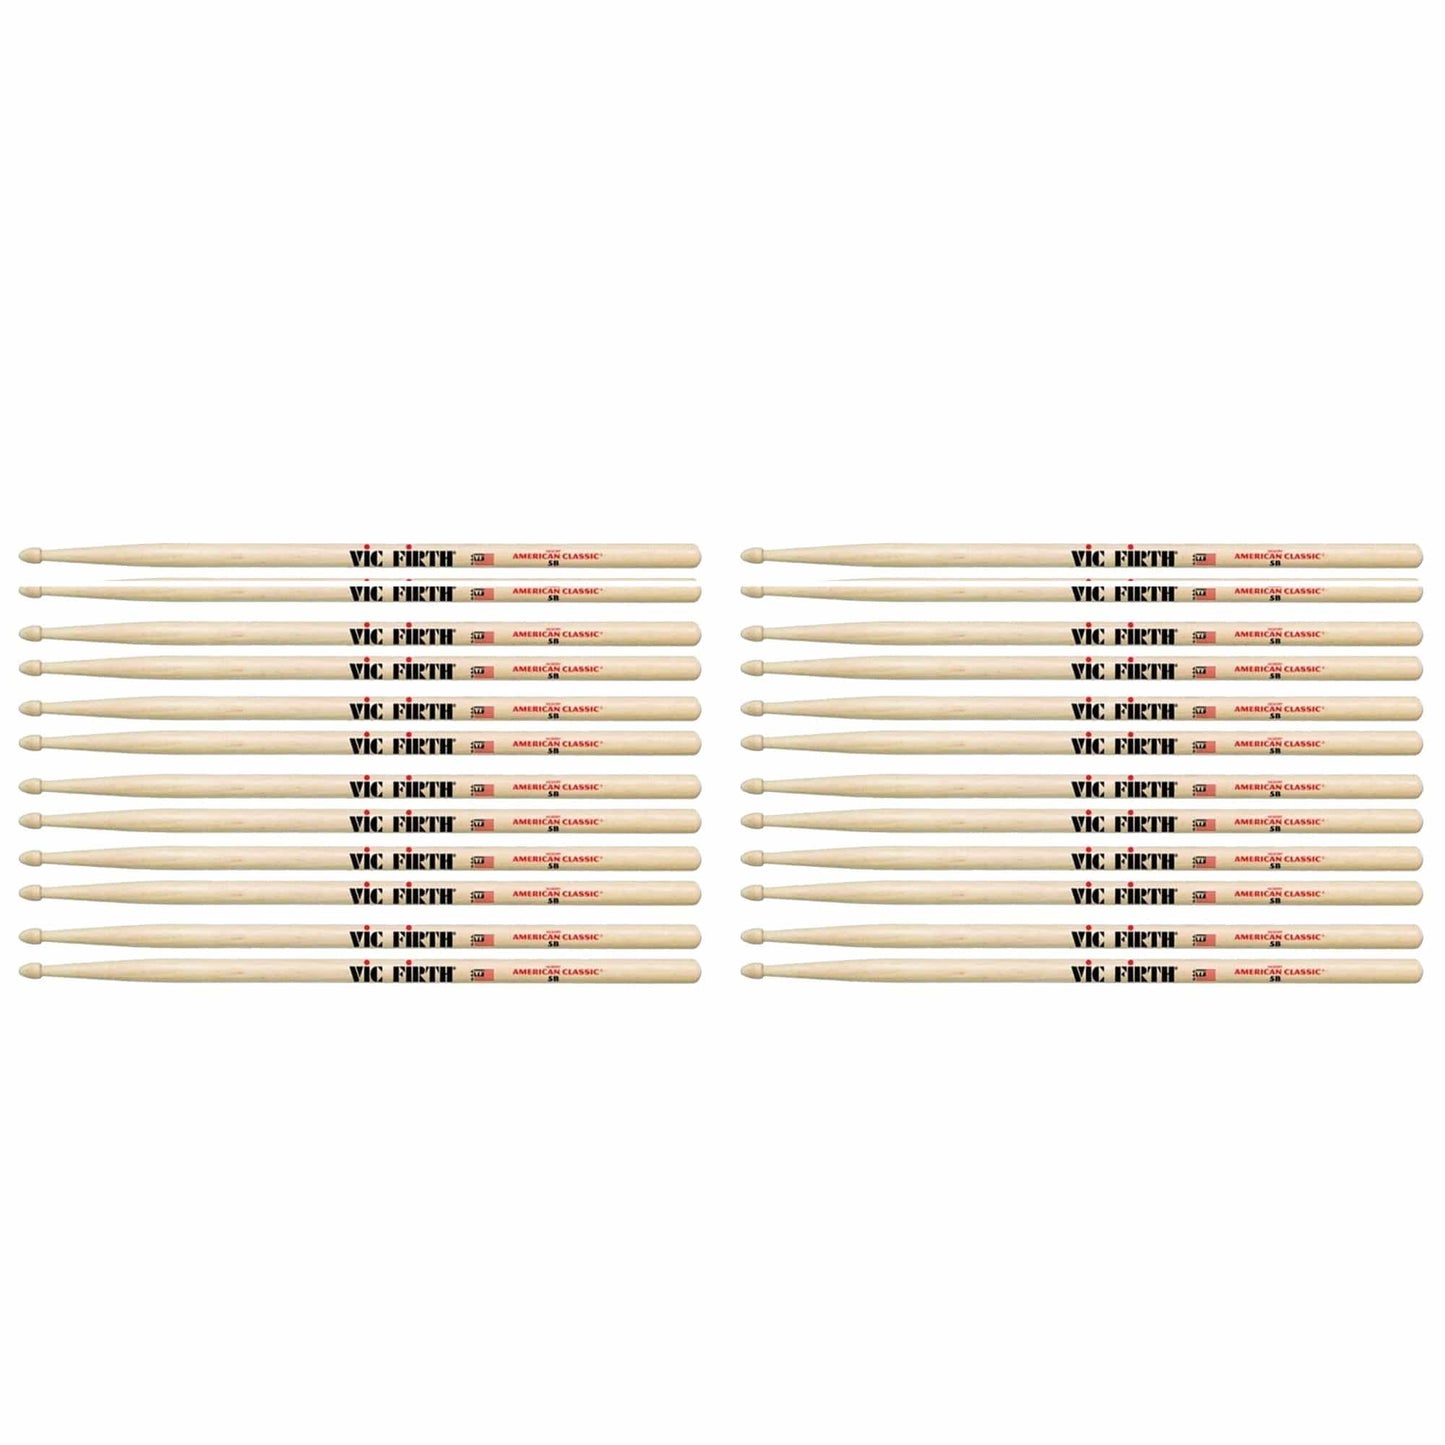 Vic Firth 5B Wood Tip Drum Sticks (12 Pair Bundle) Drums and Percussion / Parts and Accessories / Drum Sticks and Mallets